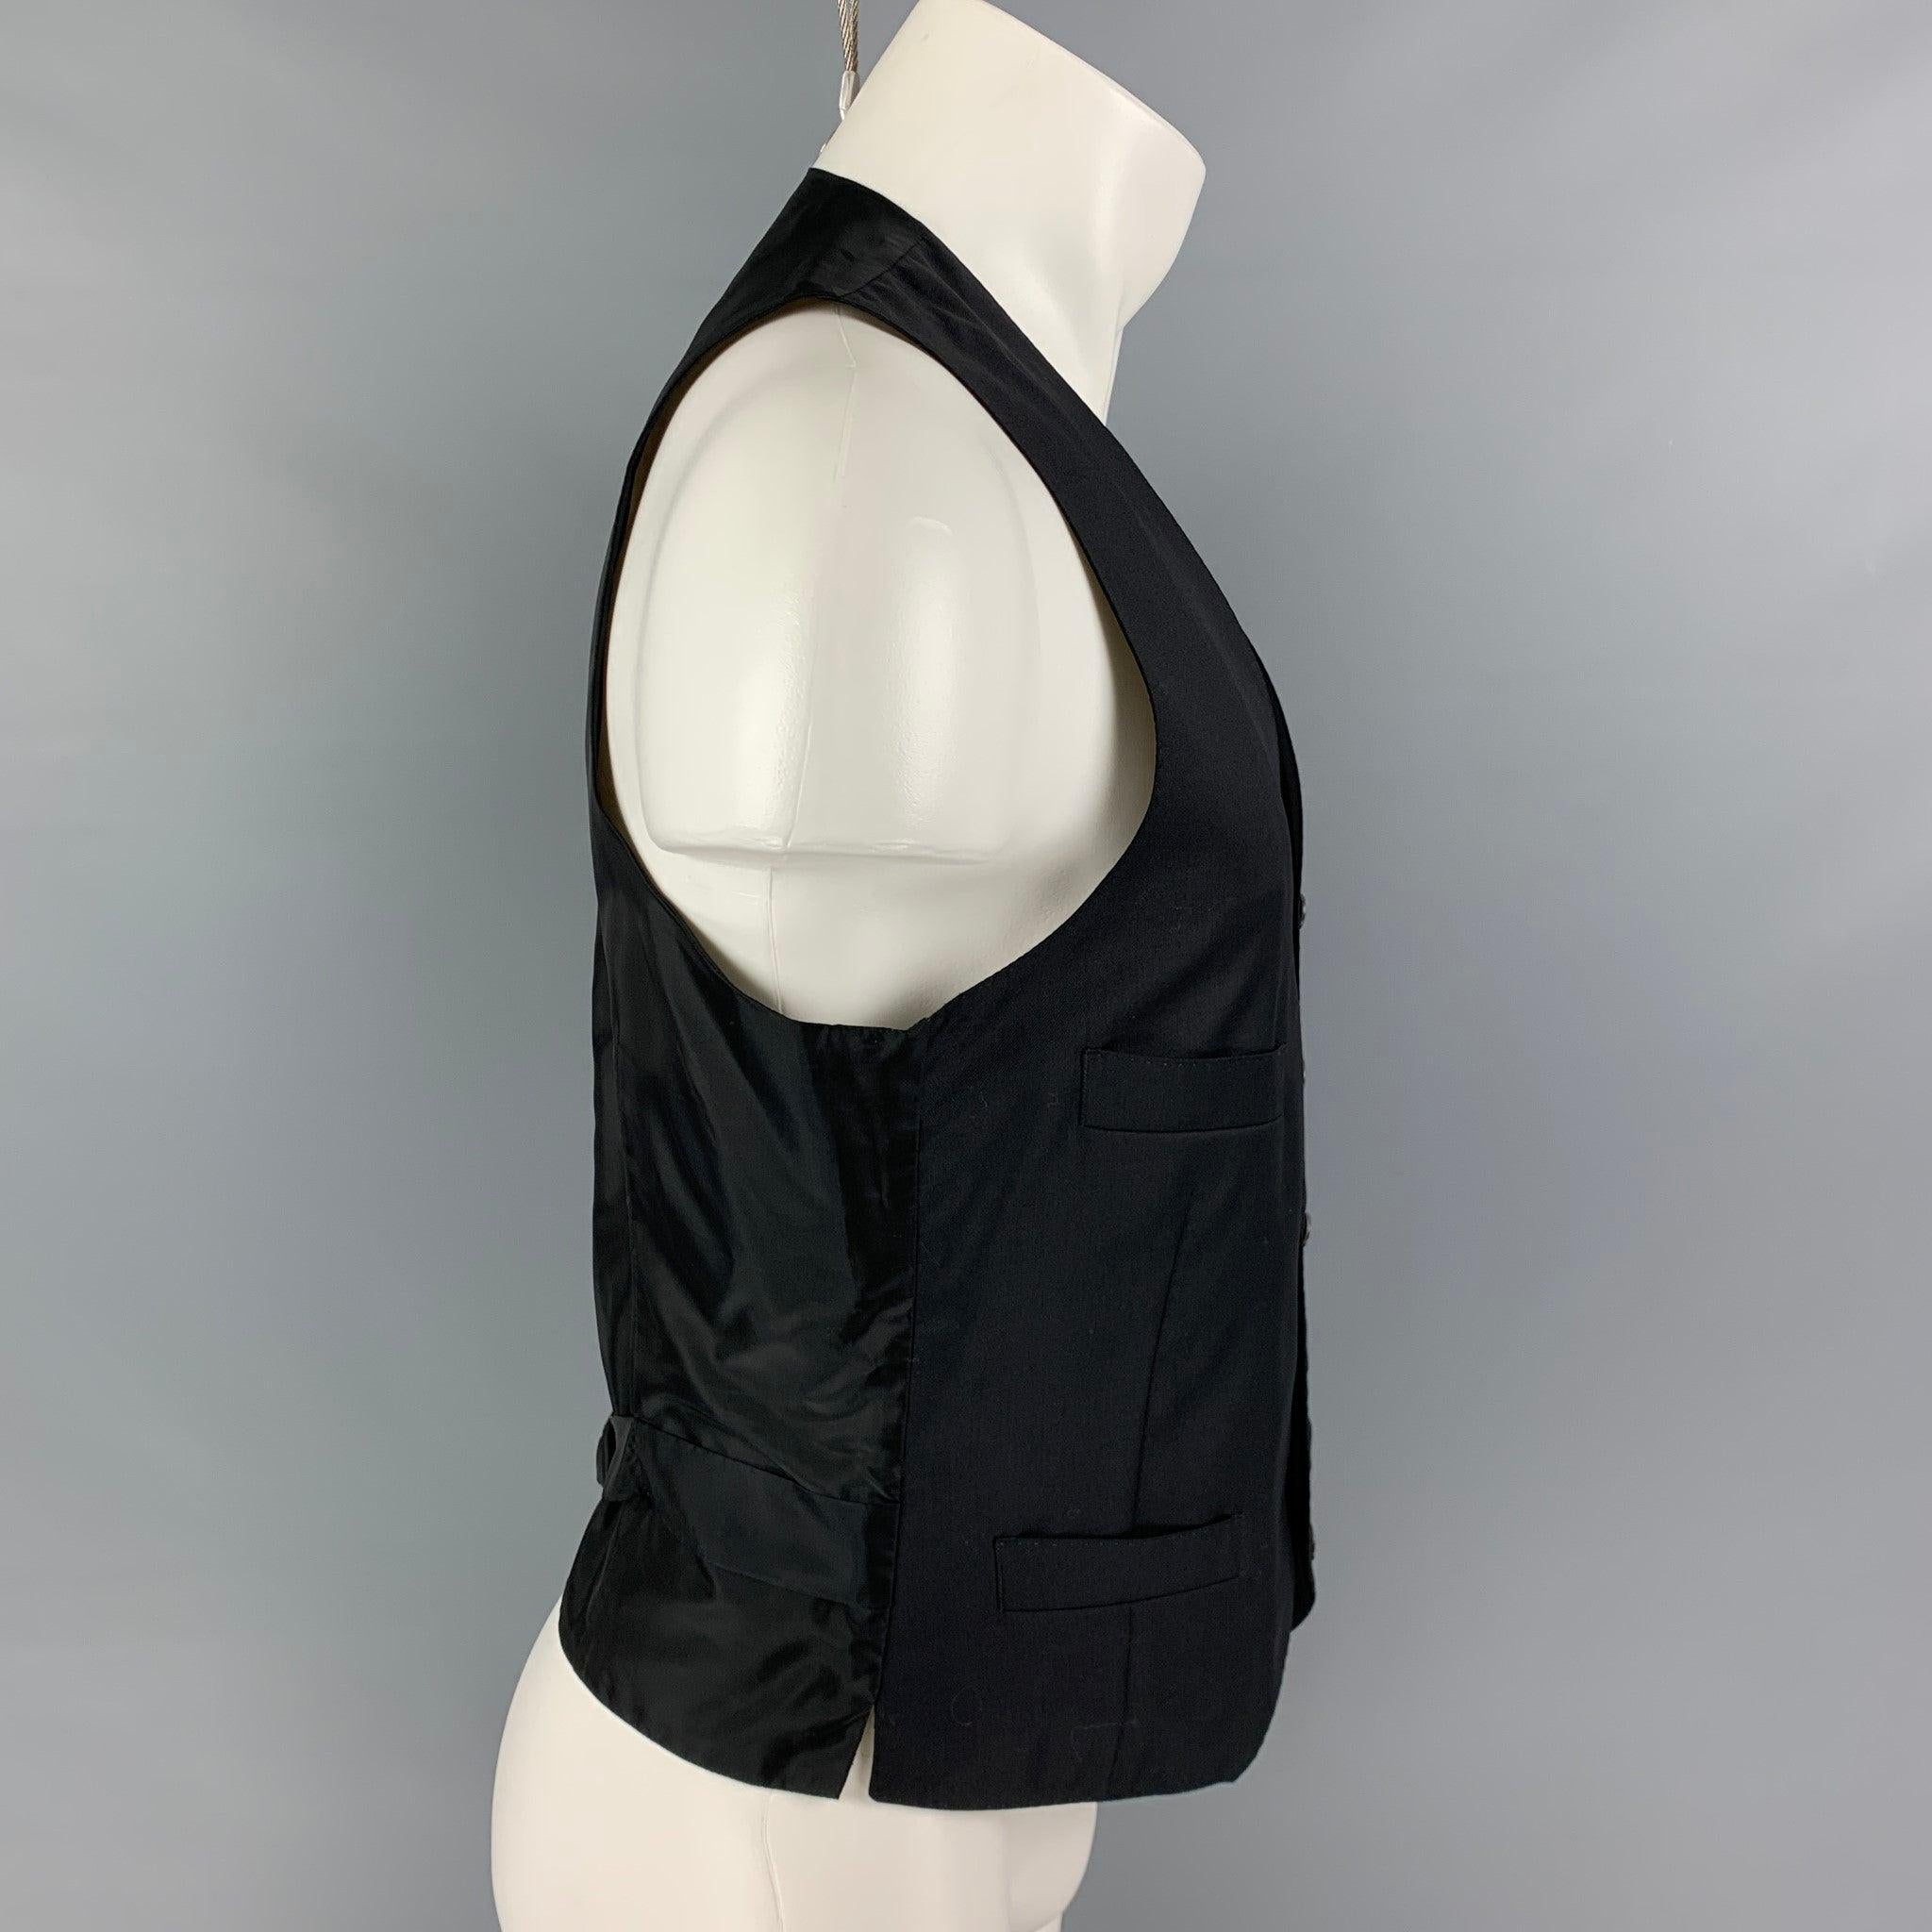 GIORGIO ARMANI vest comes in a black wool / cashmere featuring a adjustable back strap, slit pockets, and a buttoned closure. Made in Italy.
Excellent
Pre-Owned Condition. 

Marked:   50 

Measurements: 
 
Shoulder: 13 inches Chest: 38 inches